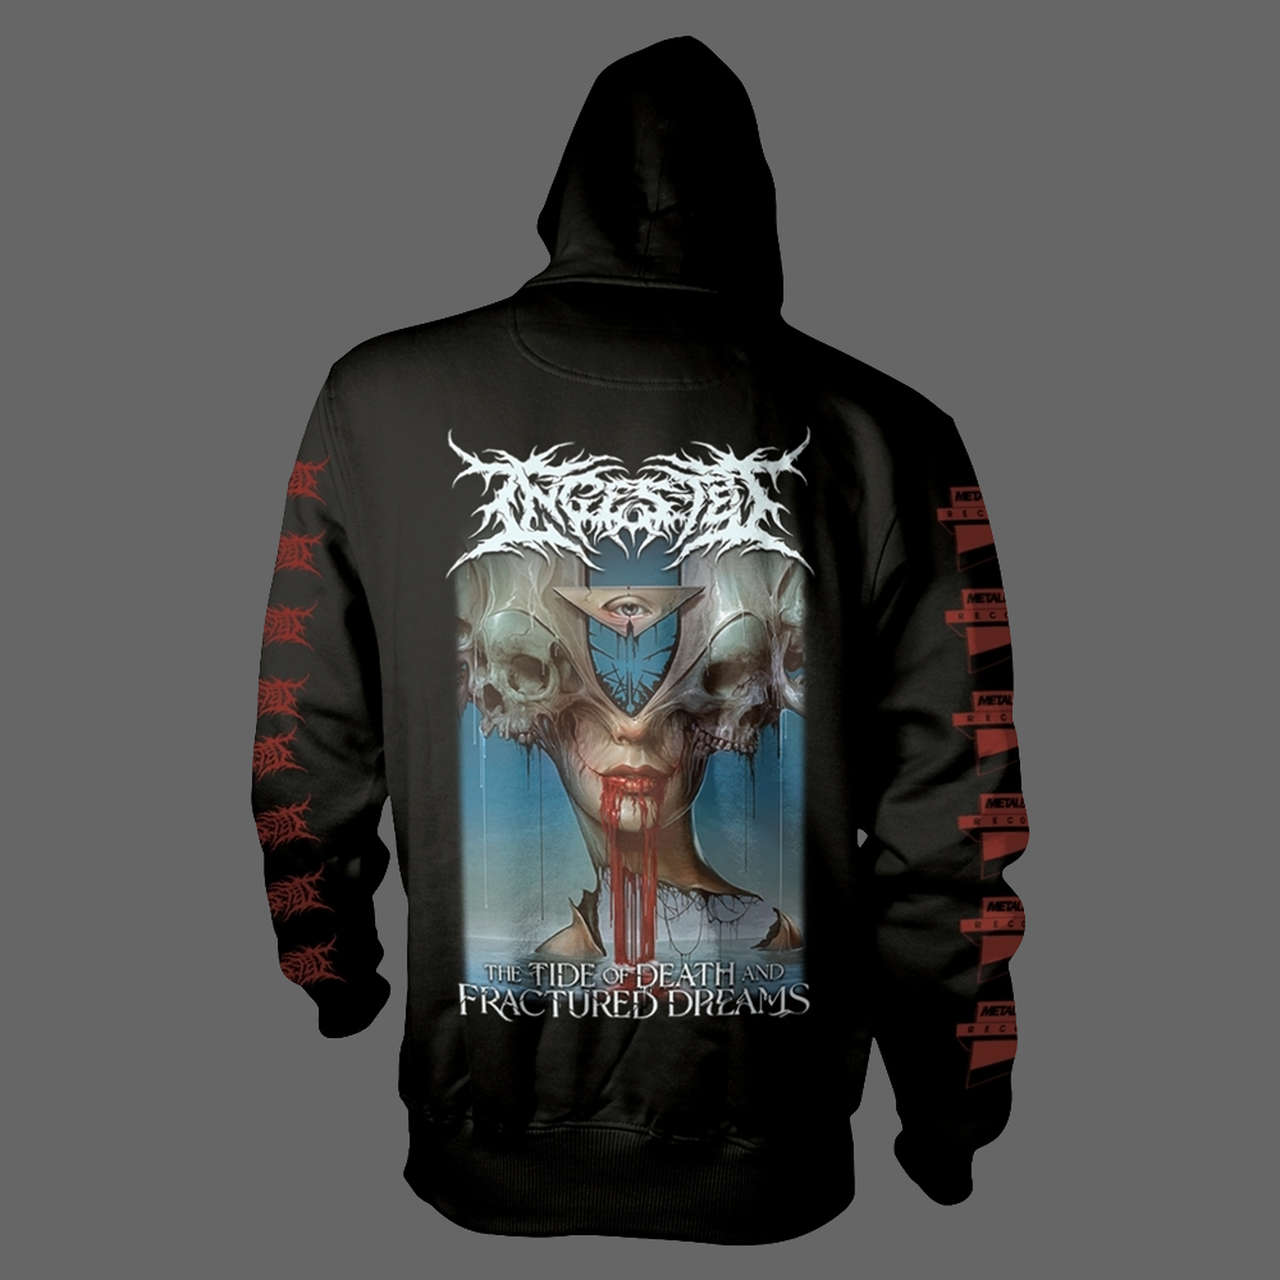 Ingested - The Tide of Death and Fractured Dreams (Hoodie)